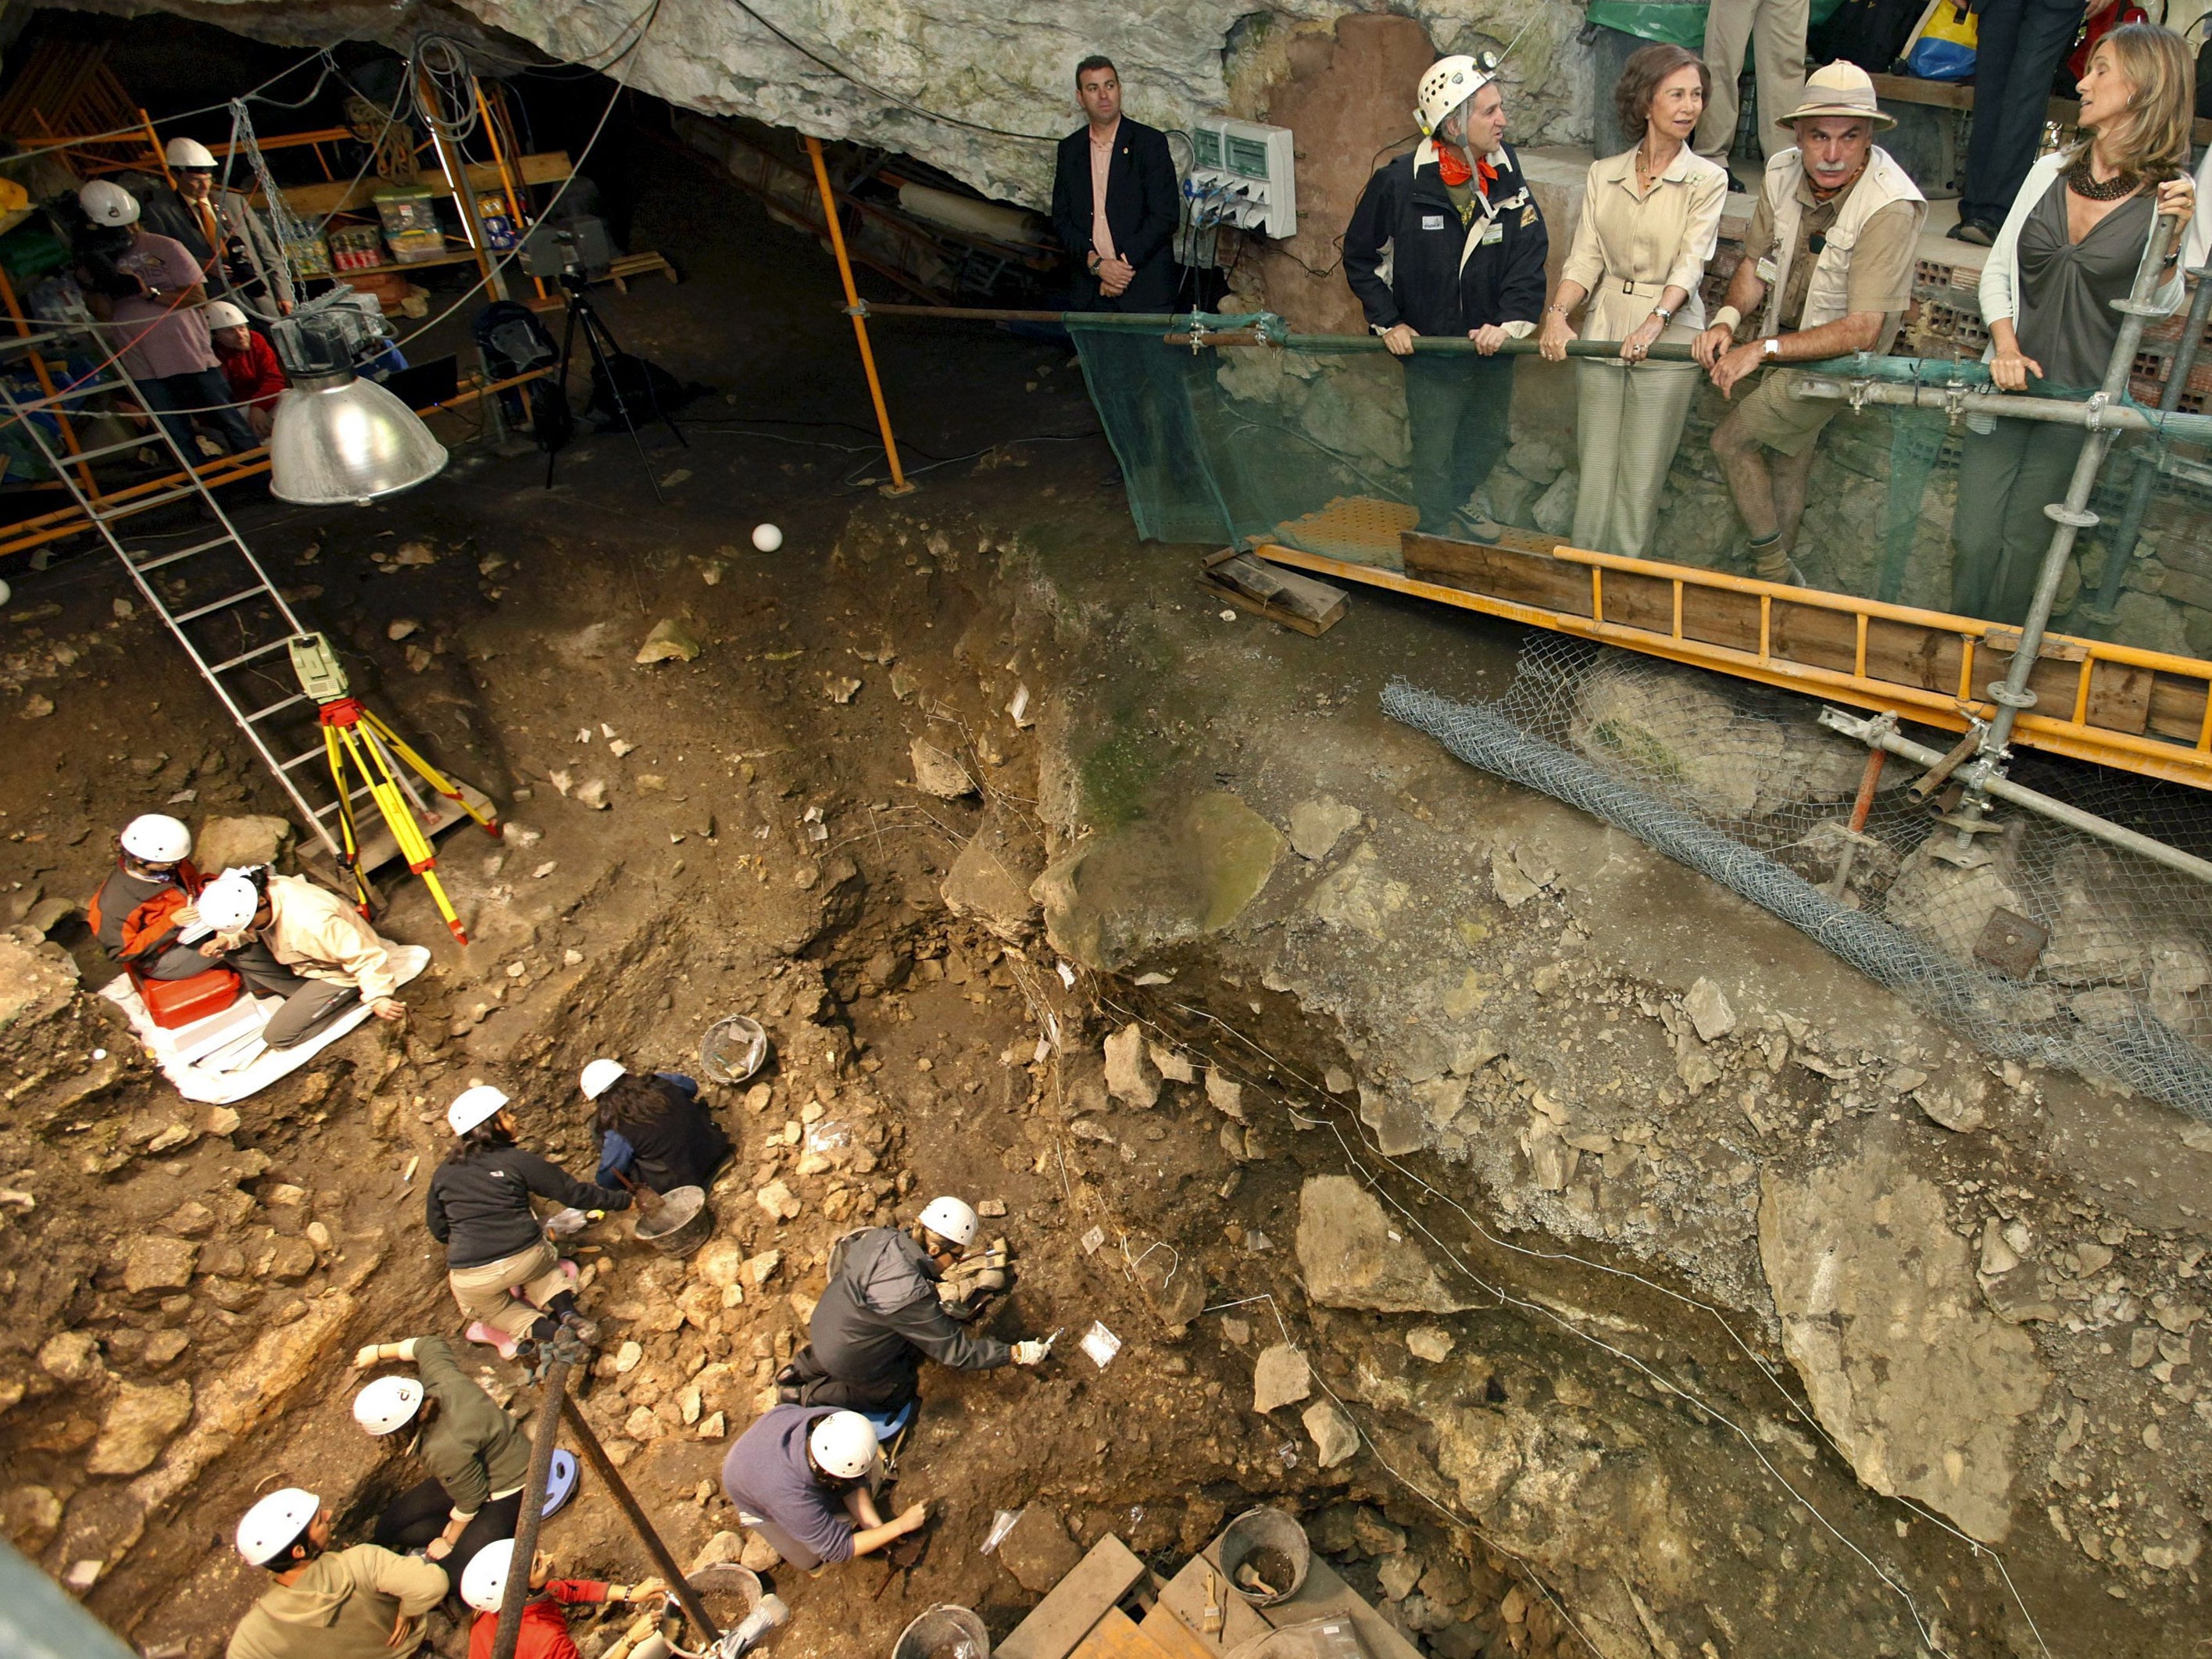 Queen Sofia of Spain visiting the Atapuerca archaeological site in 2009